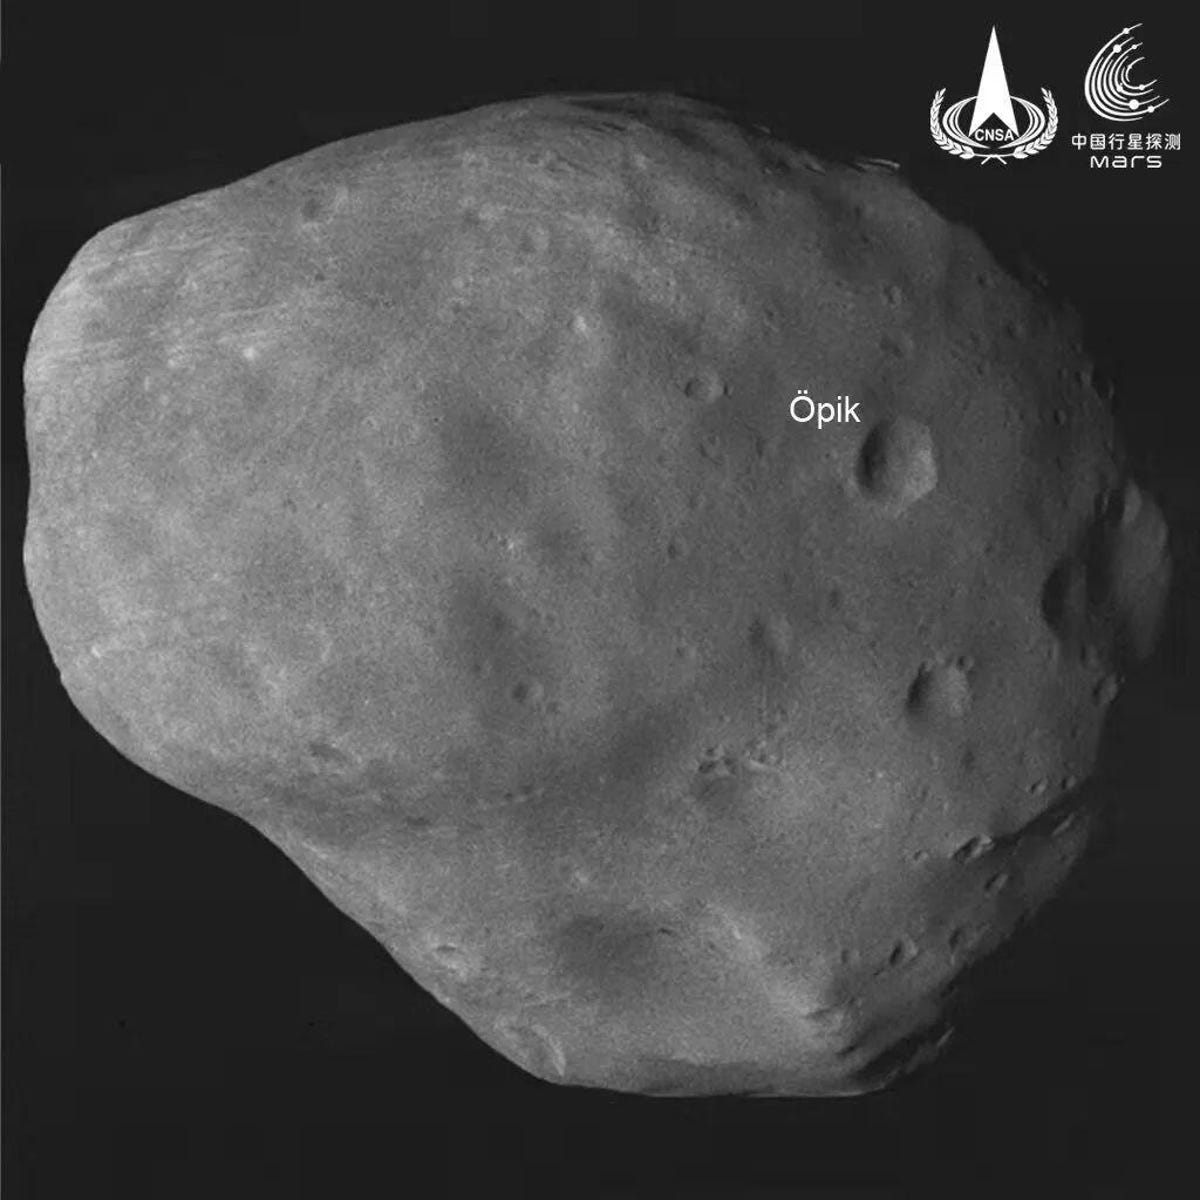 Mars' moon Phobos in black and white looking like a rounded, pockmarked potato.